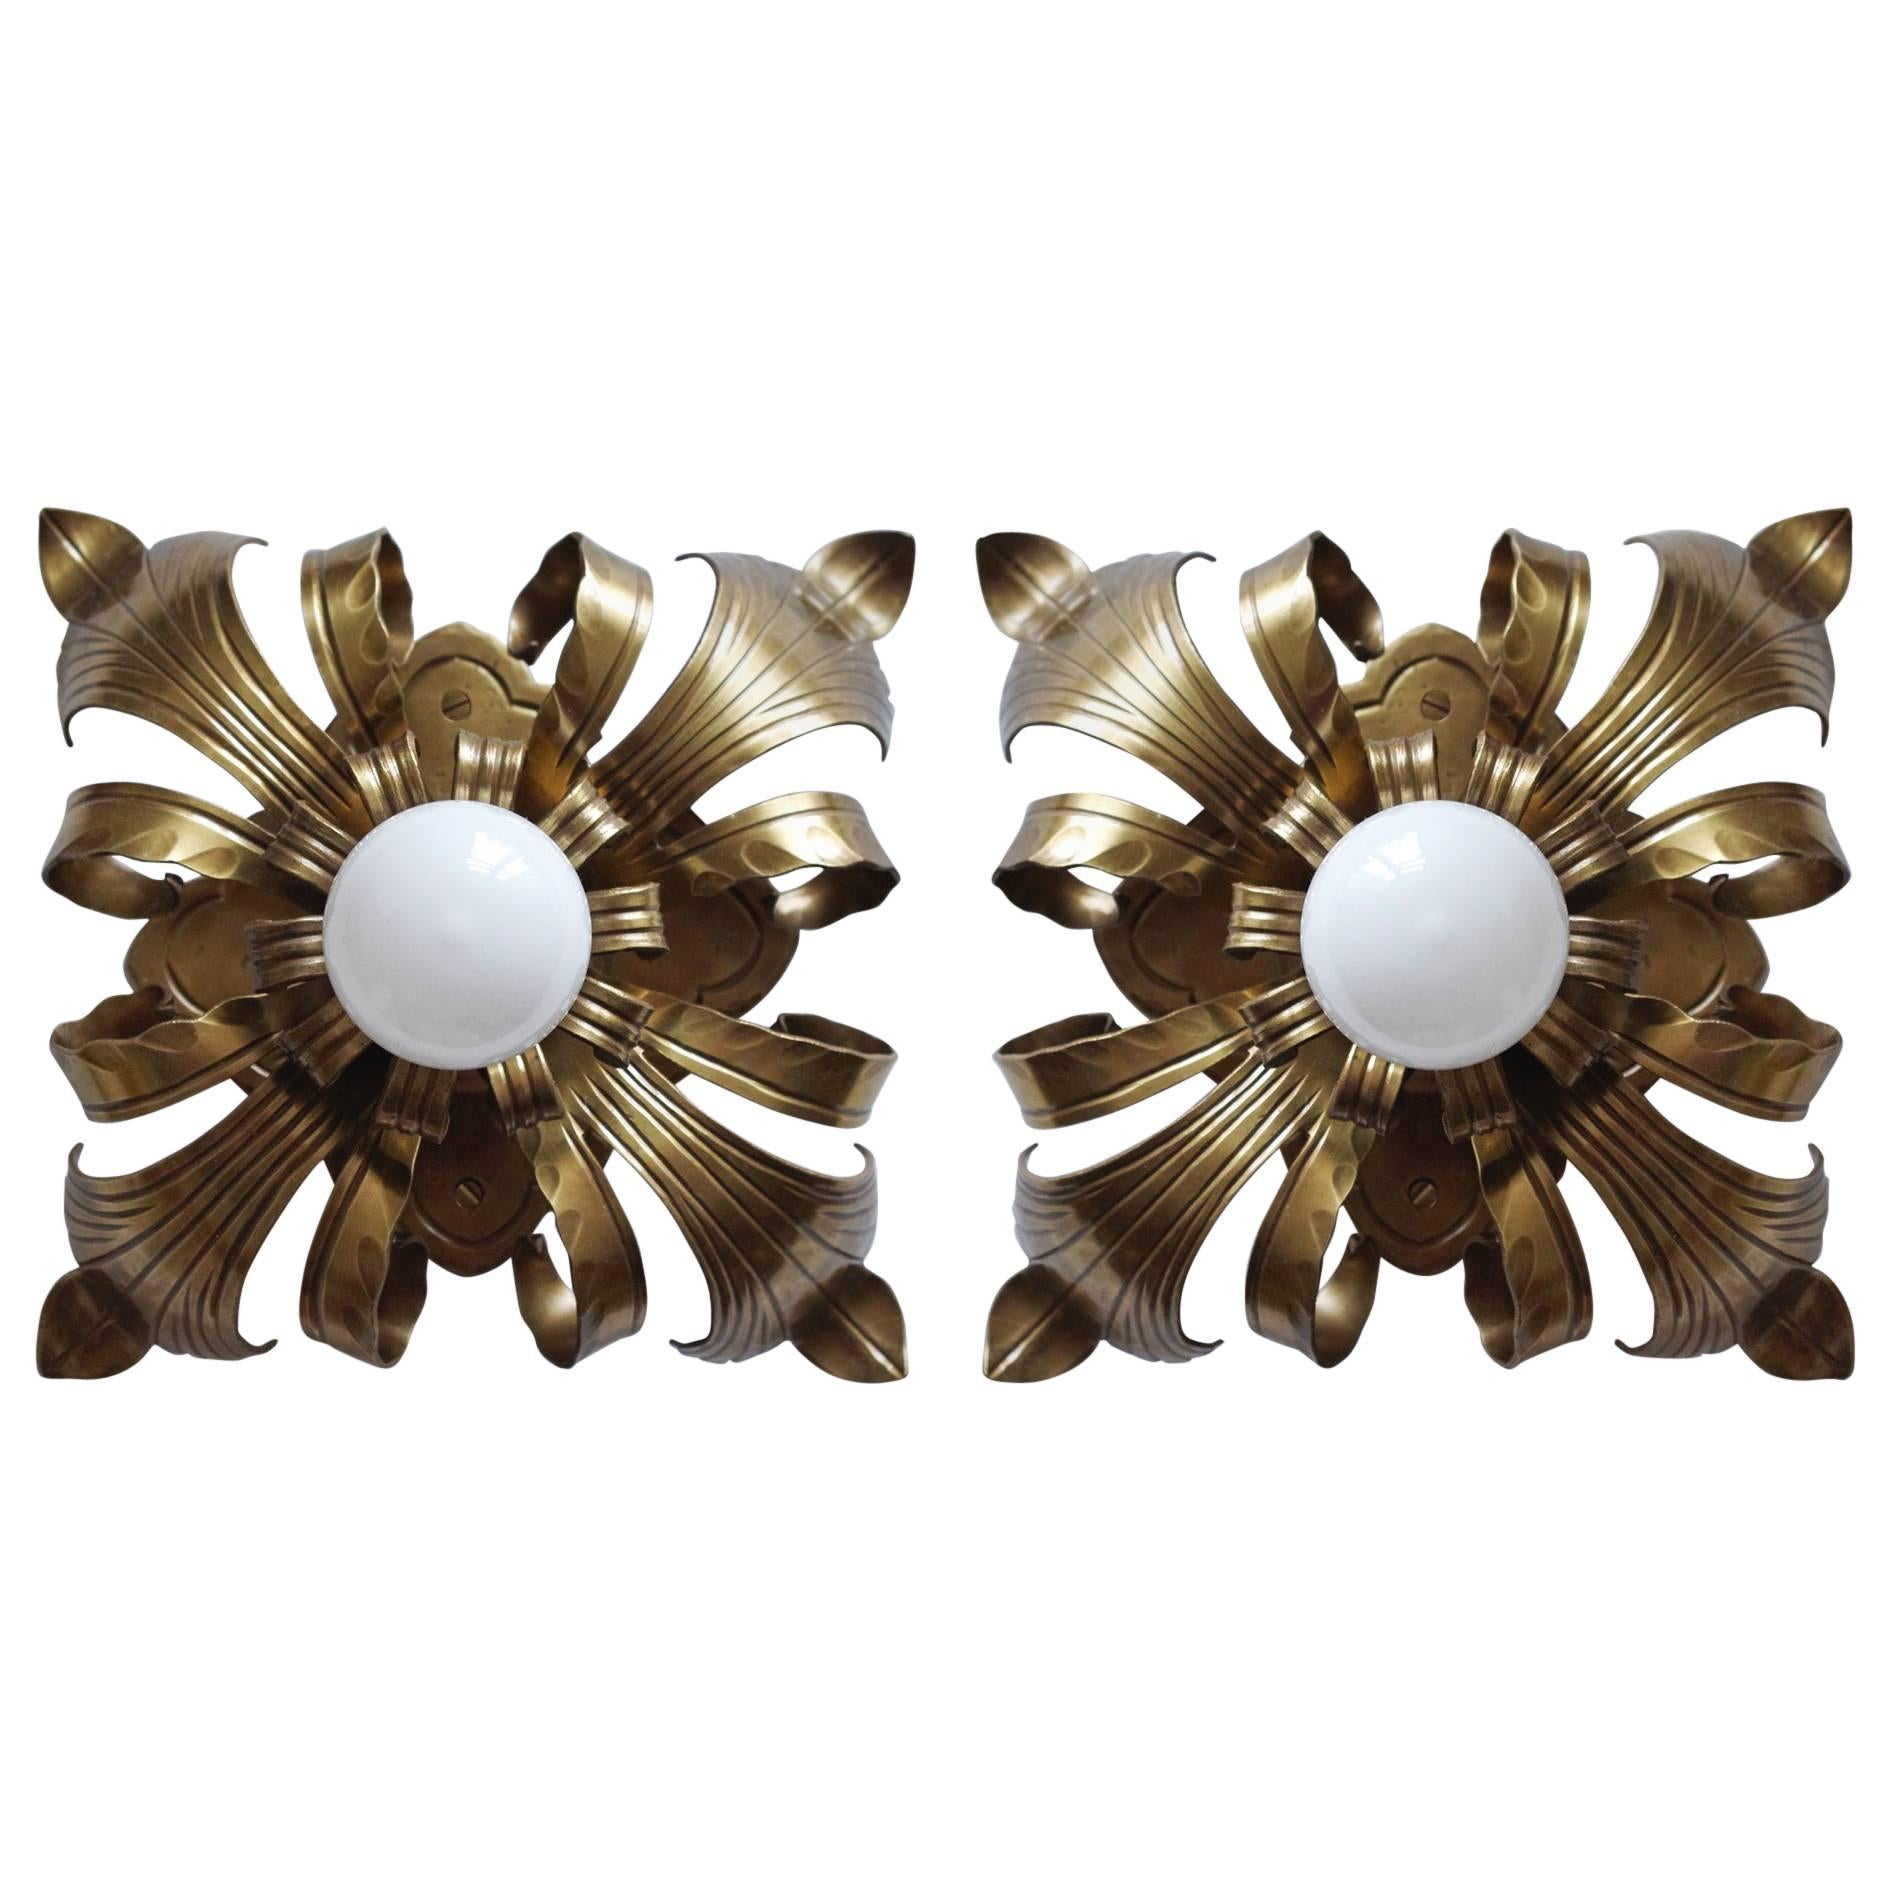 Pair of Solid Brass Ceiling or Wall Lights Flush Mounts Sconces, Italy, 1960s